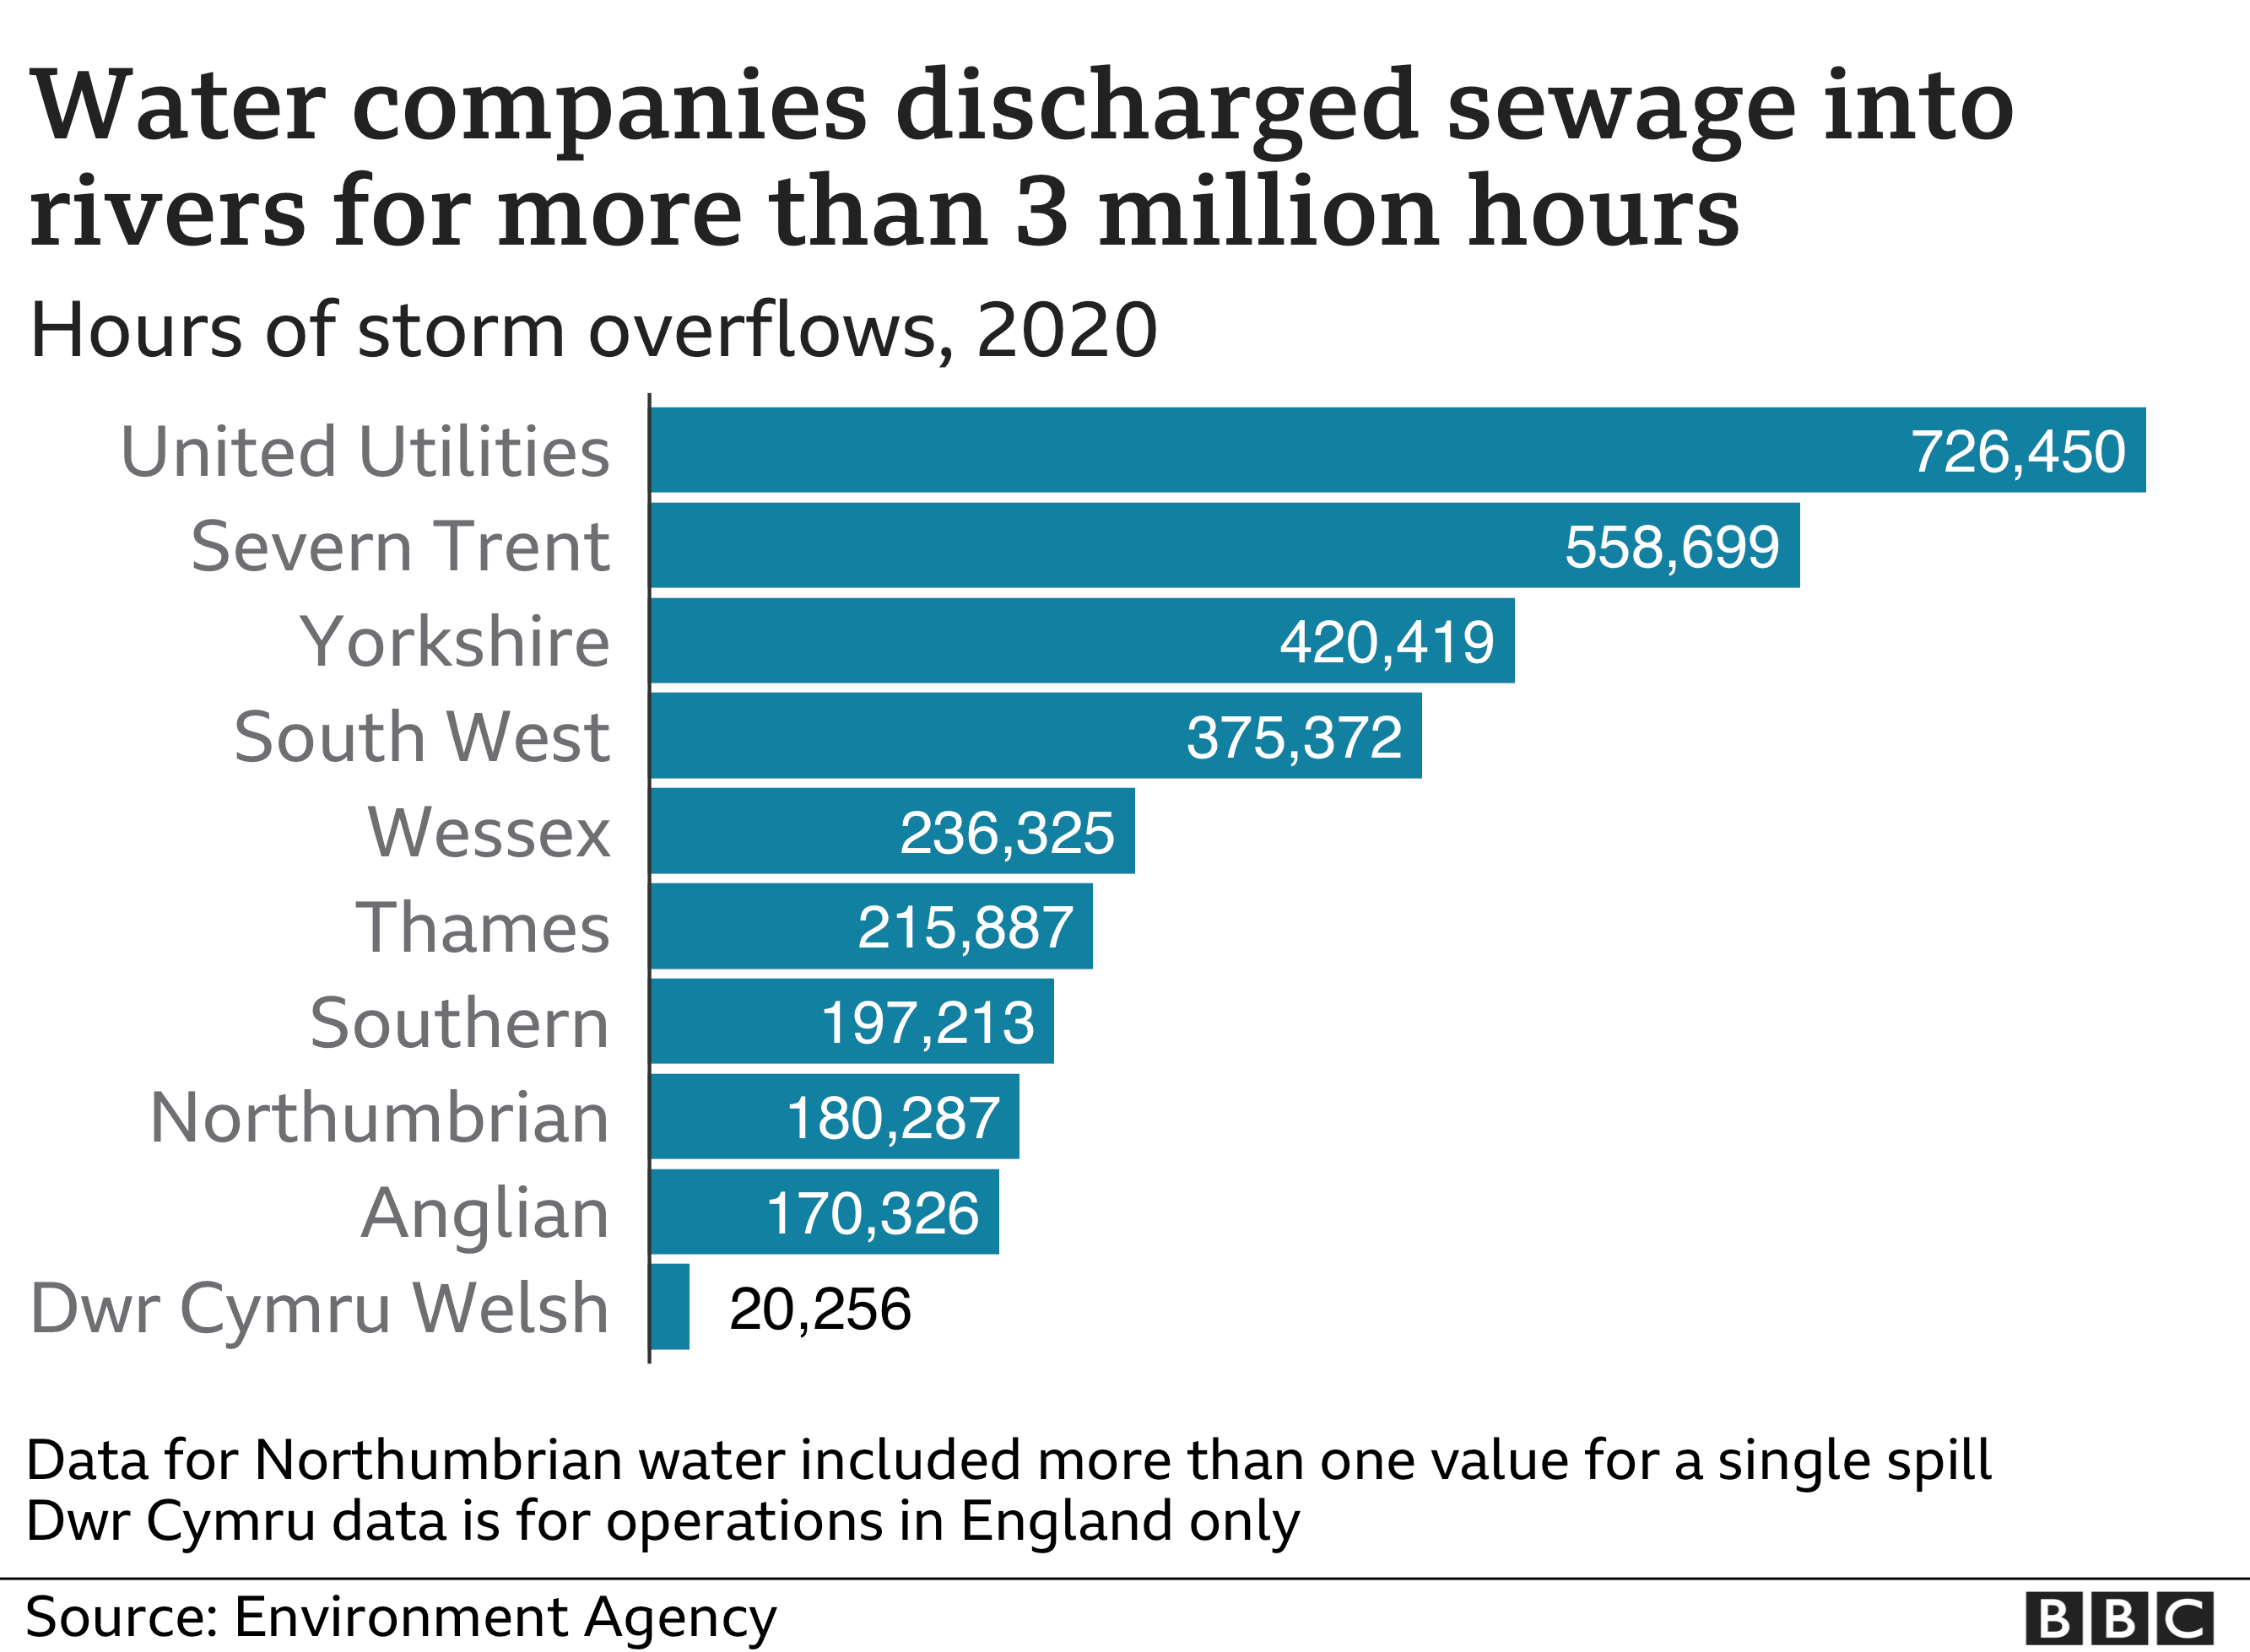 Graph showing the number of hours water companies have discharged wastewater into rivers.  31 MAR